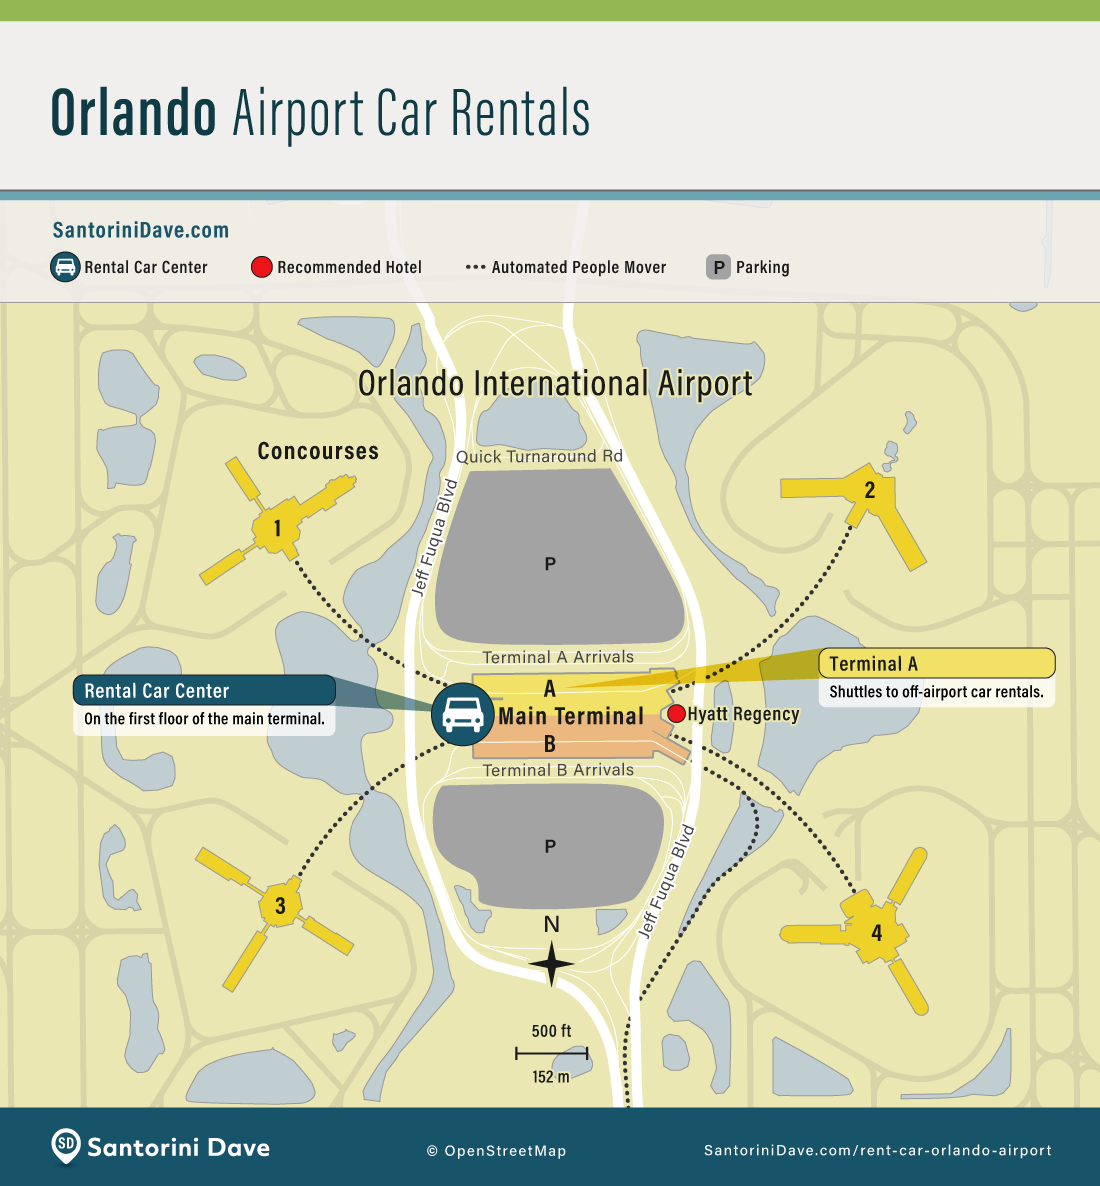 Map showing the location of the Orlando Florida airport Rental Car Center and airport terminals and shuttles.